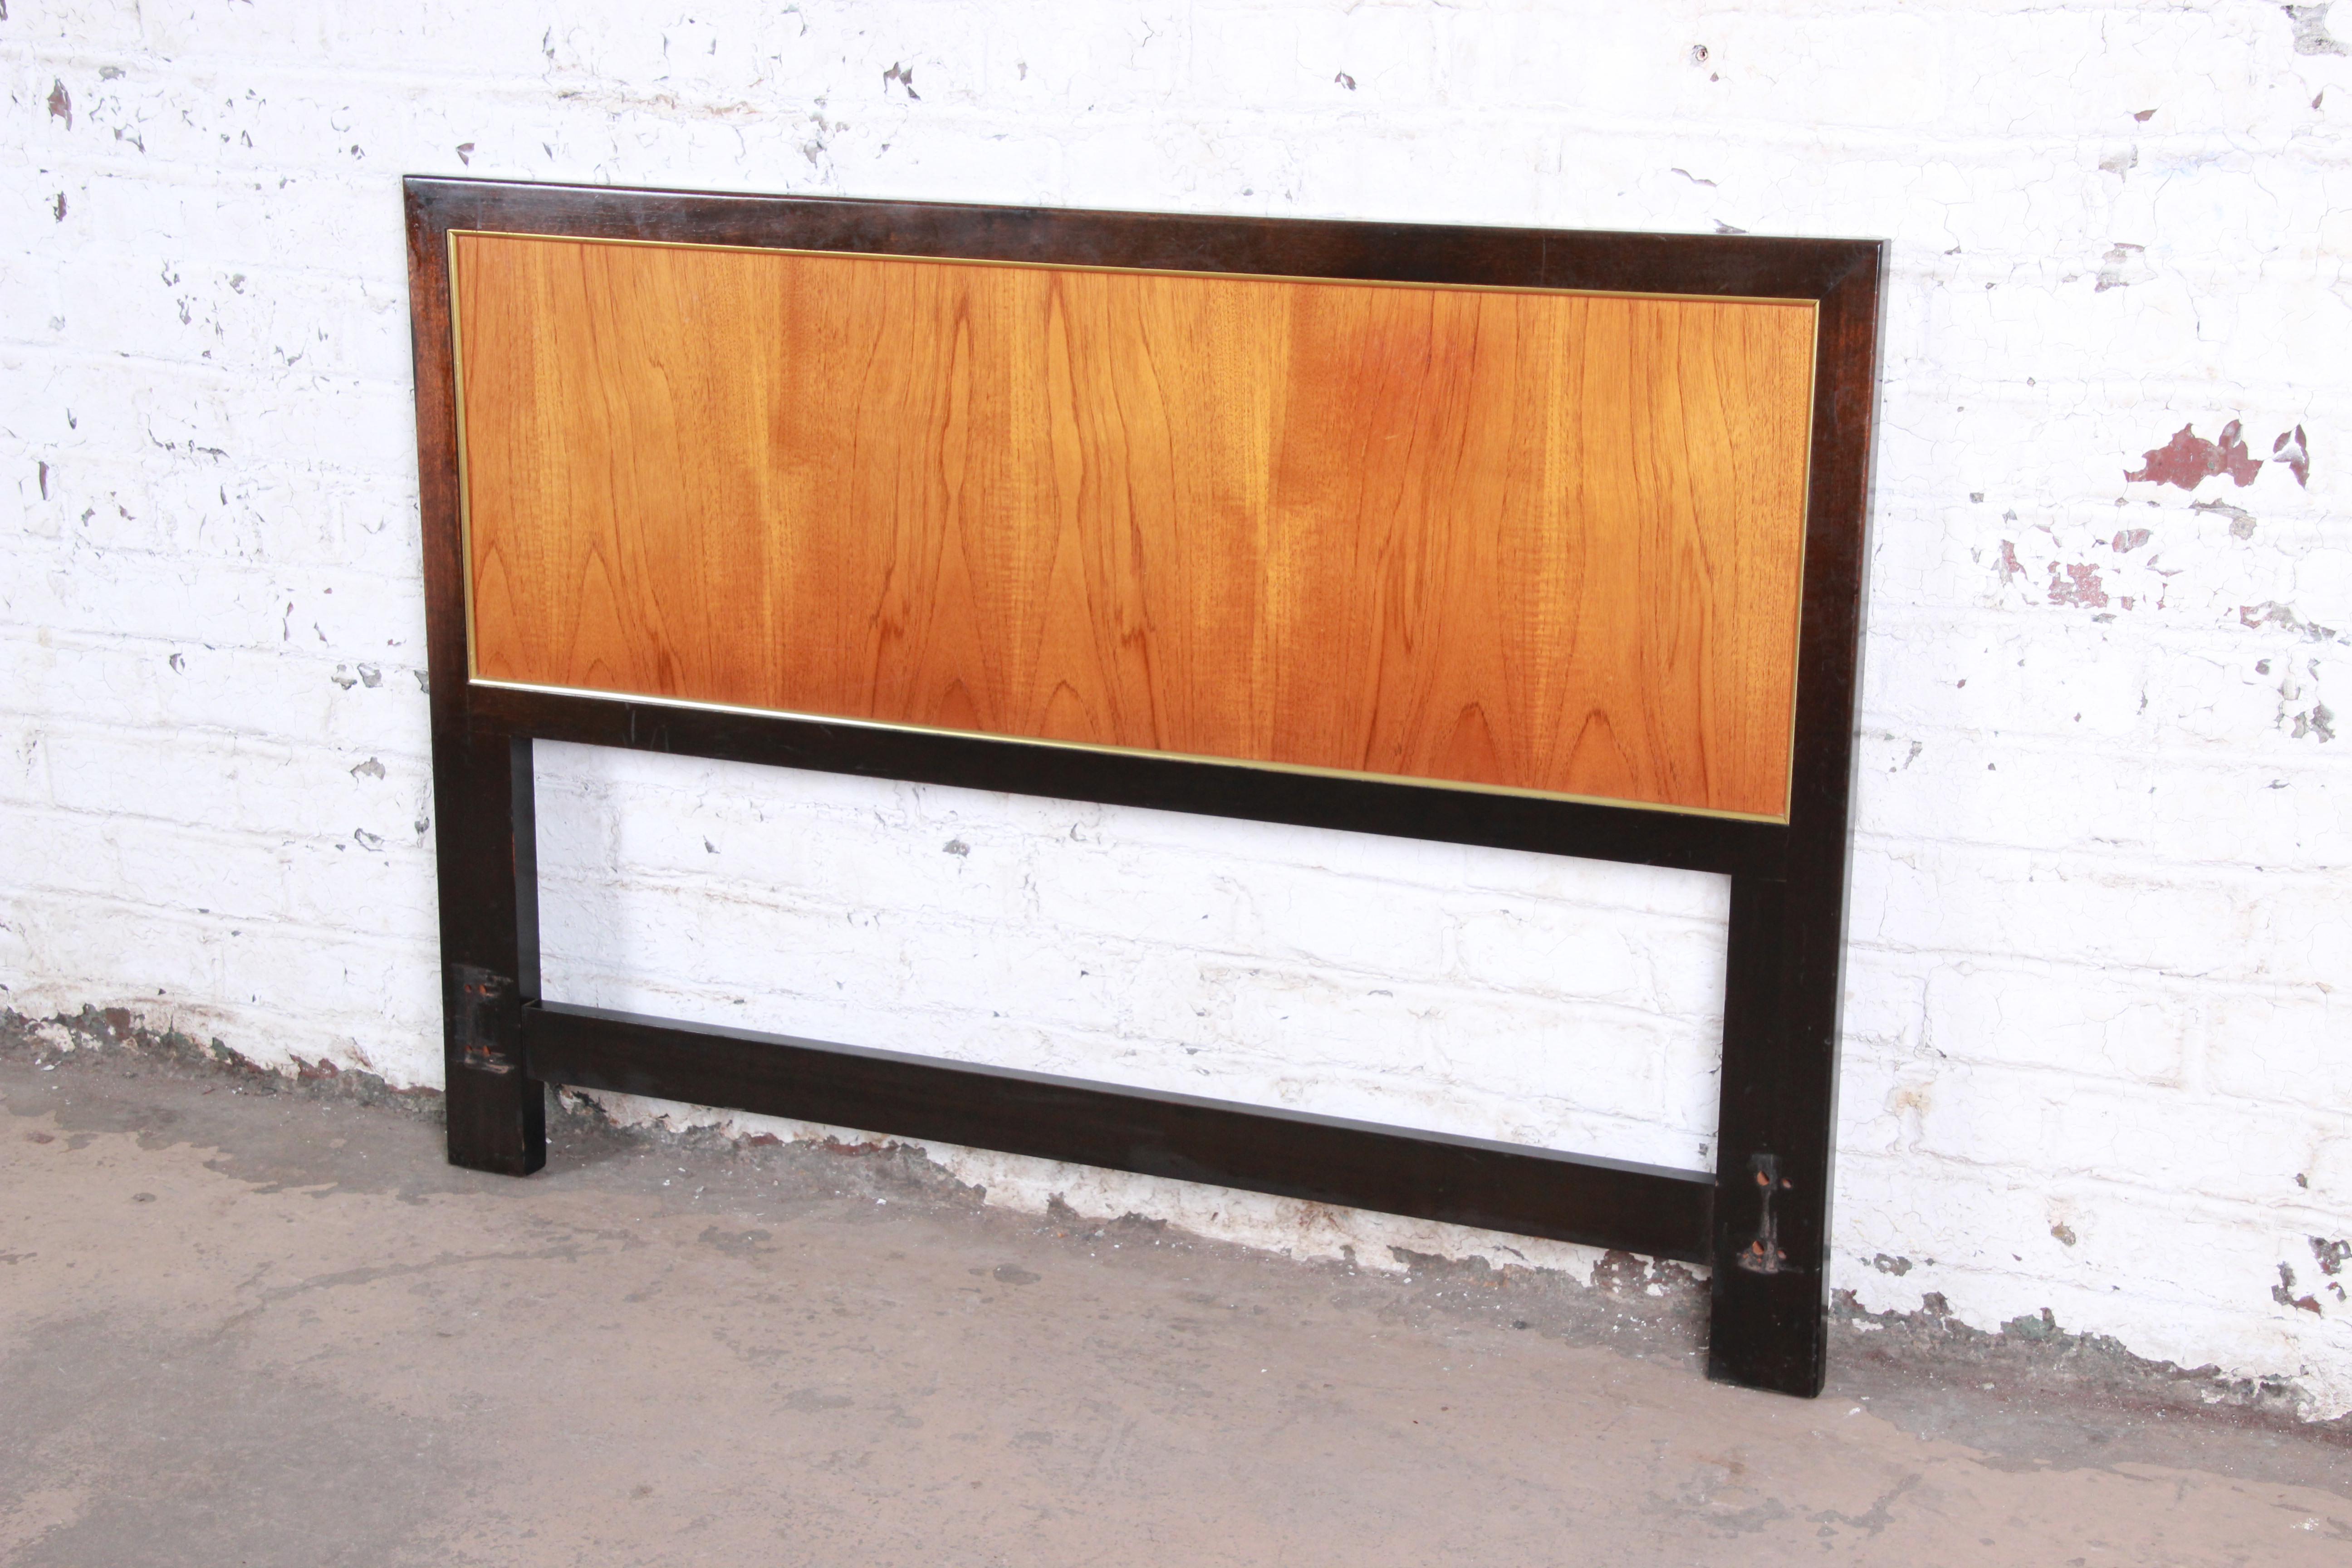 An elegant Mid-Century Modern full size headboard designed by Harvey Probber, circa 1960. The headboard features gorgeous teak wood grain framed in mahogany with brass trim. A beautiful example of Probber's iconic design work. The headboard is in